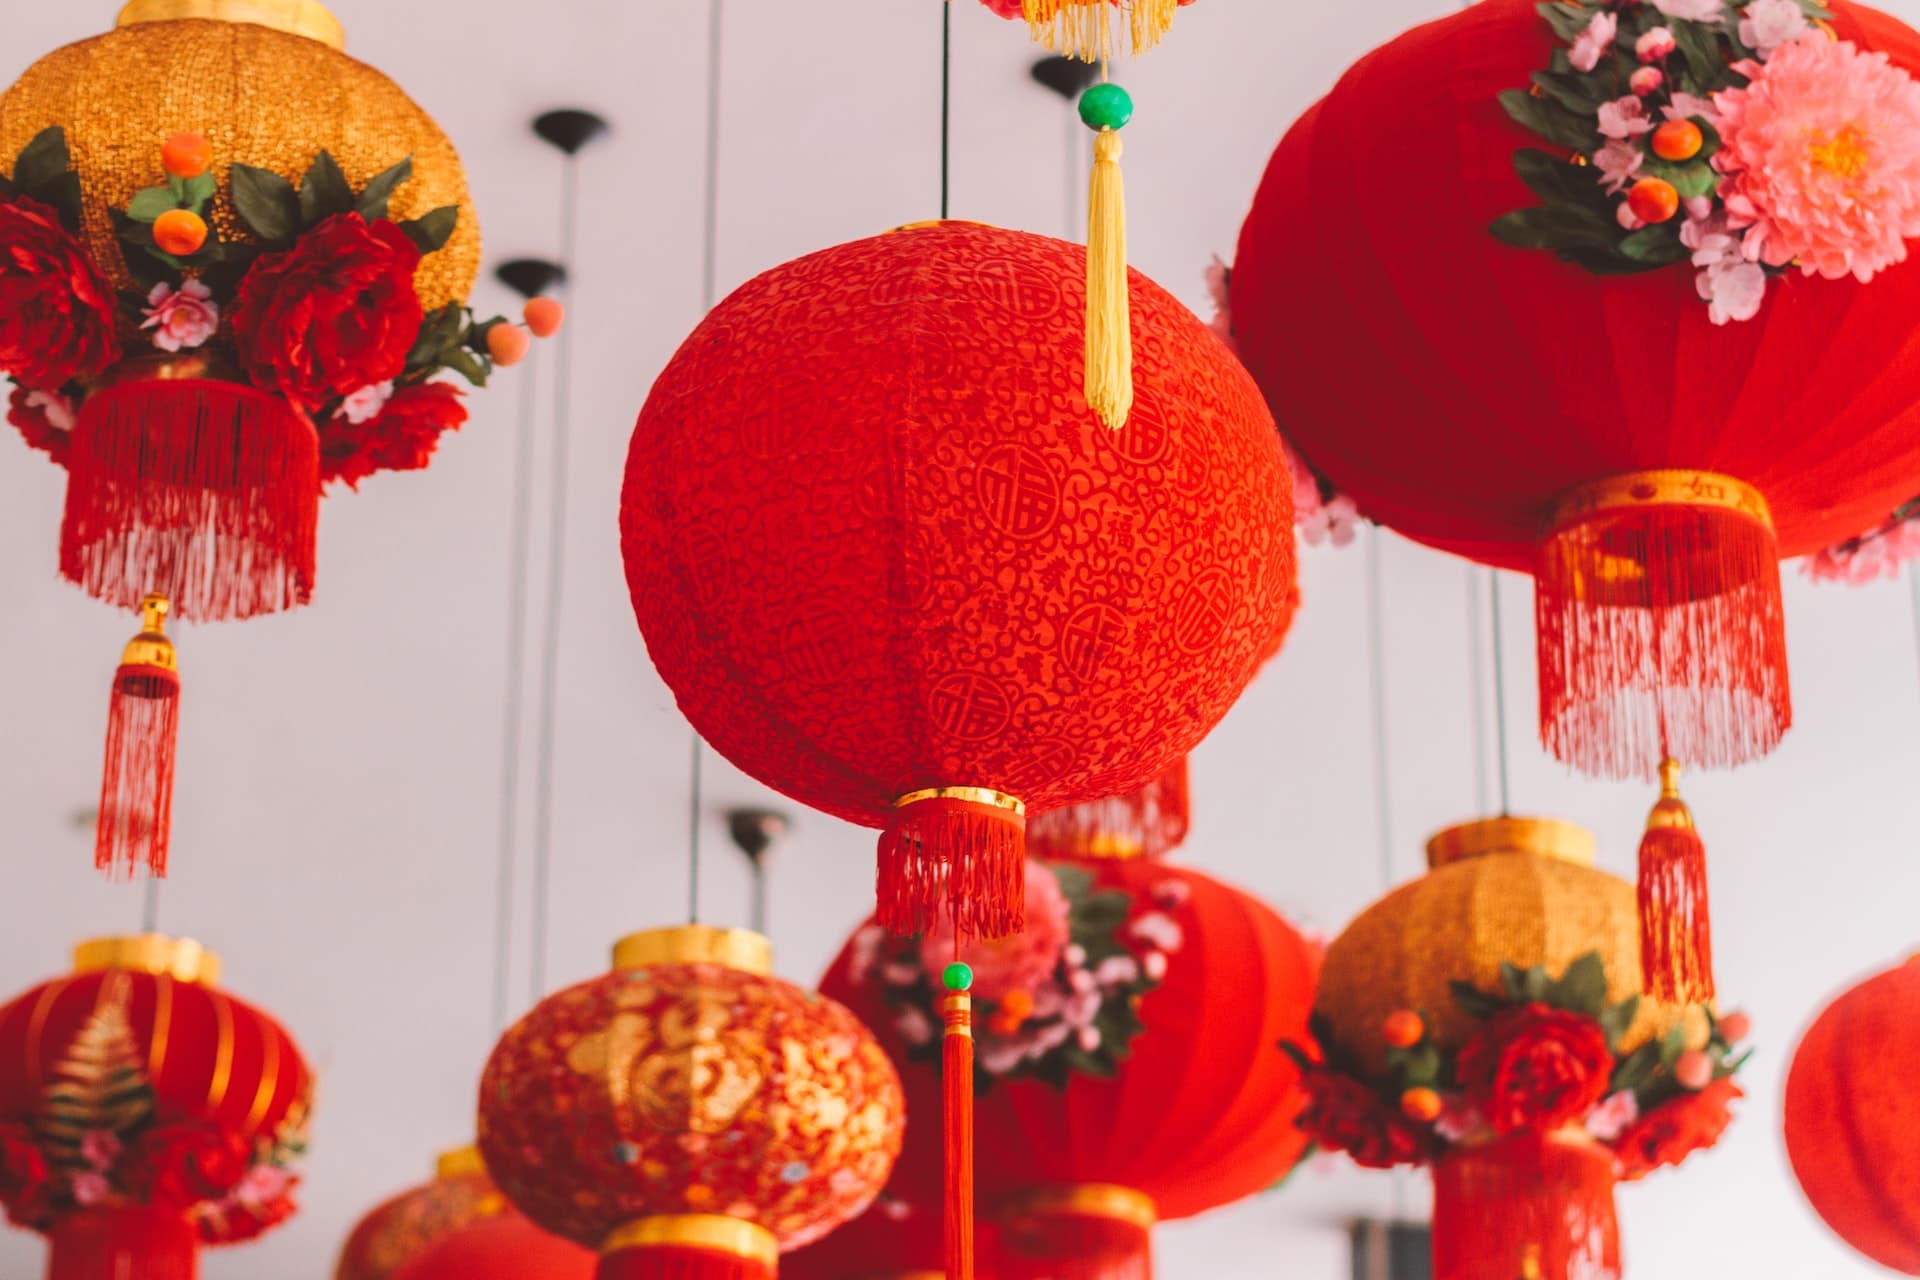 Chinese new year superstitions